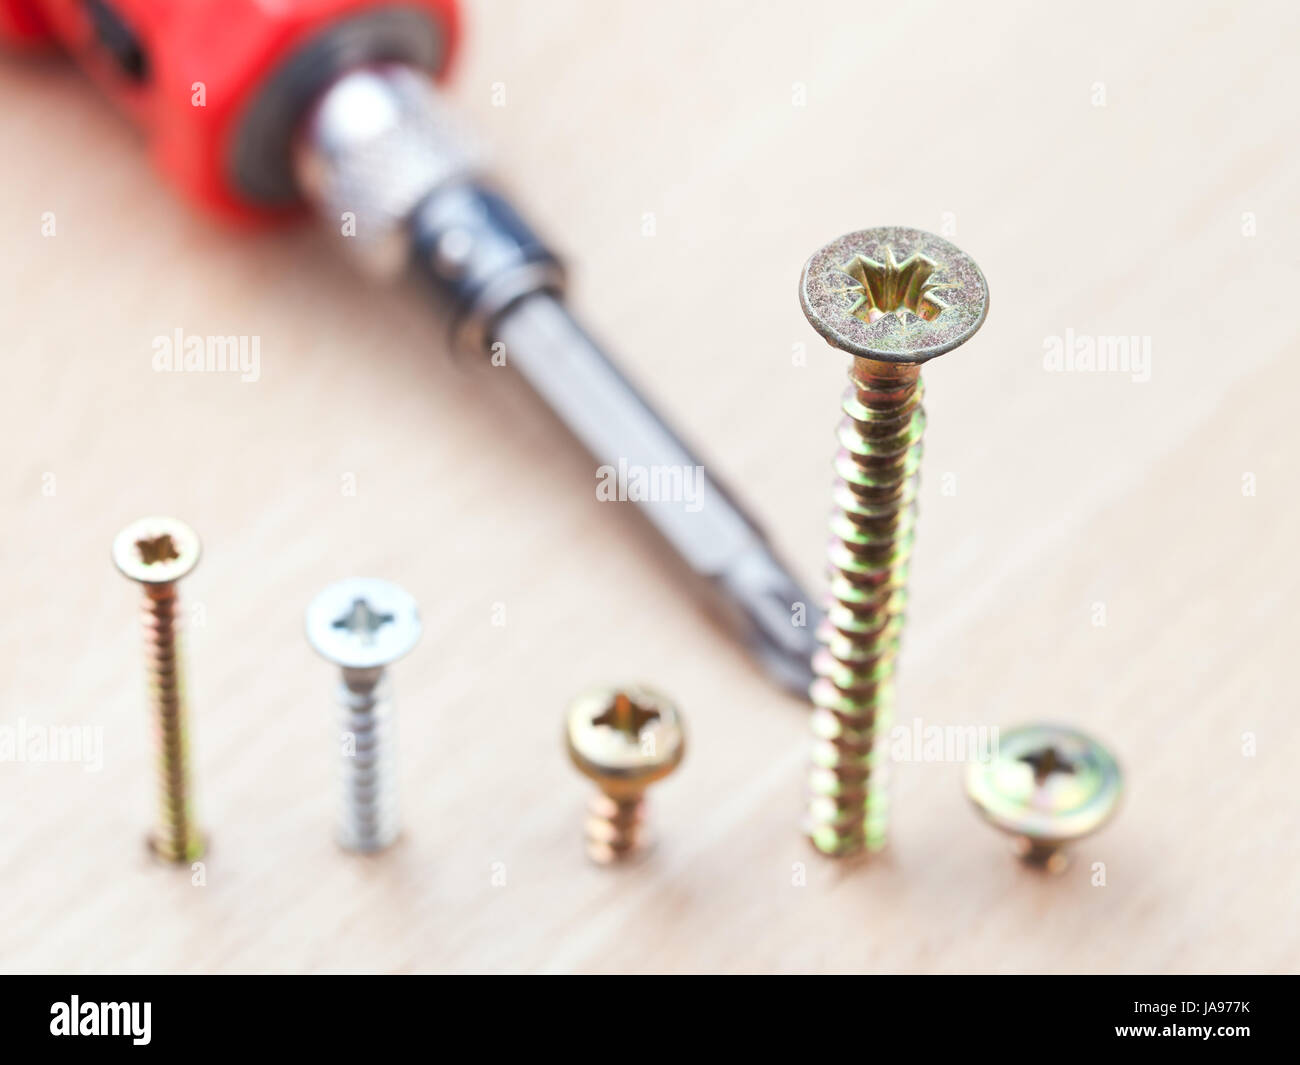 some, several, a few, order, board, tool, macro, close-up, macro admission, Stock Photo